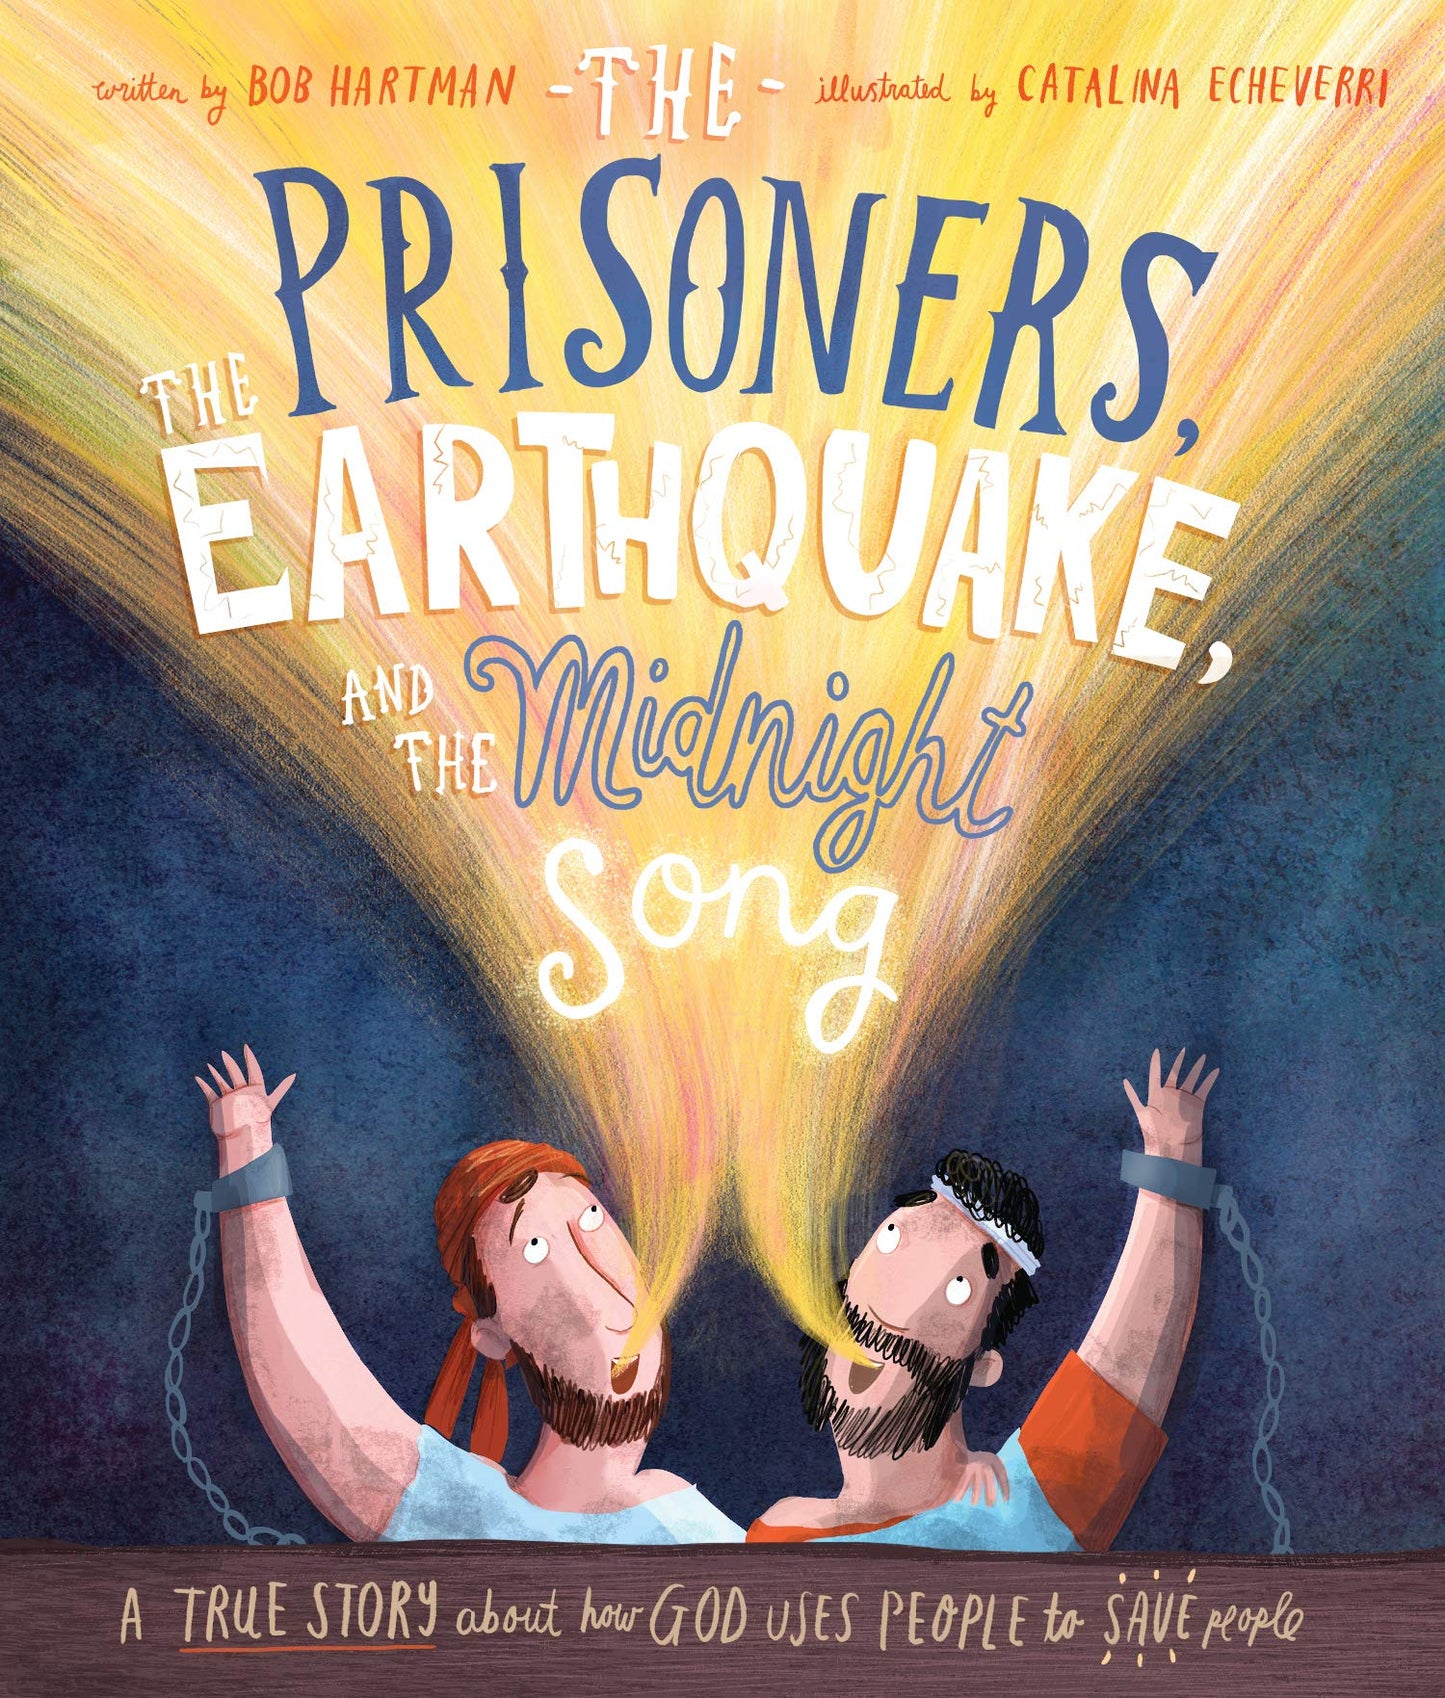 The Prisoners, the Earthquake, and the Midnight Song: A true story about how God uses people to save people (The Bible Story of Paul and the Philippian Jailer) (Tales That Tell the Truth)